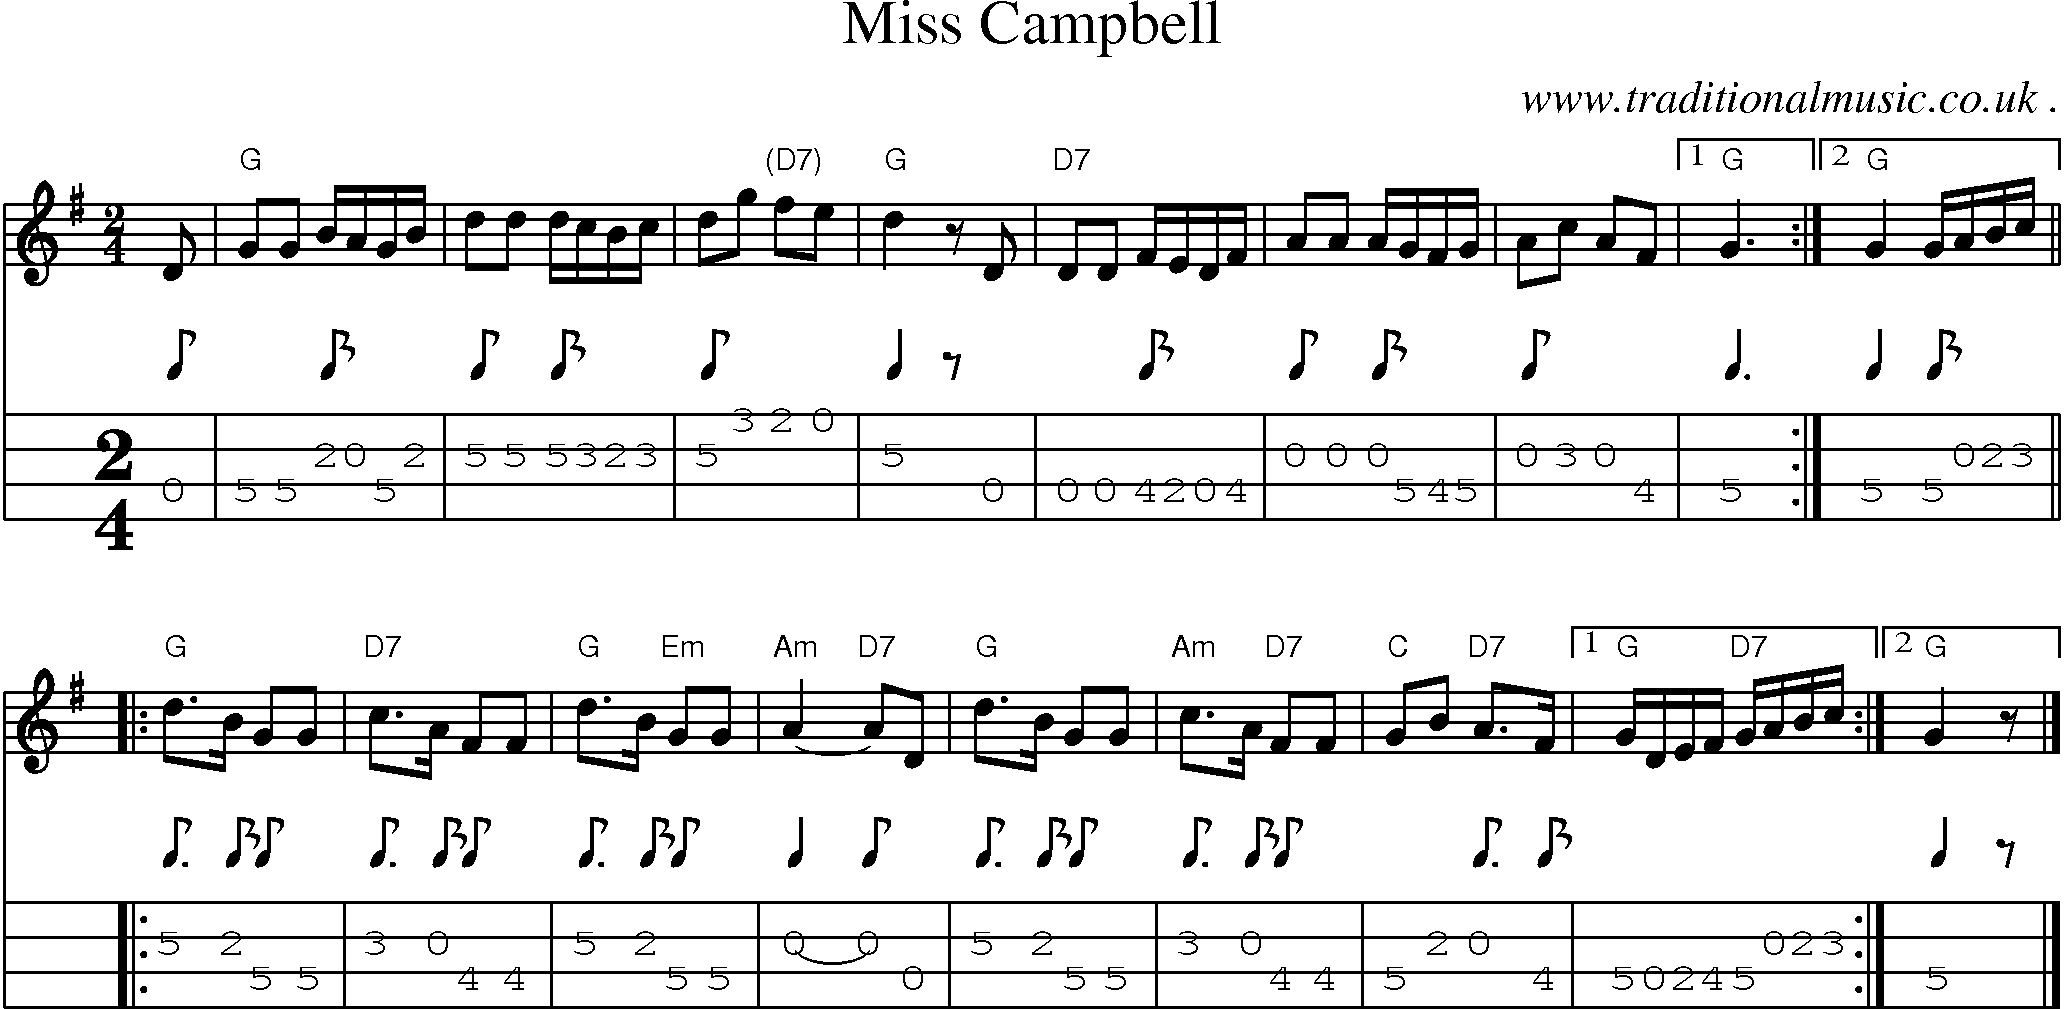 Sheet-music  score, Chords and Mandolin Tabs for Miss Campbell